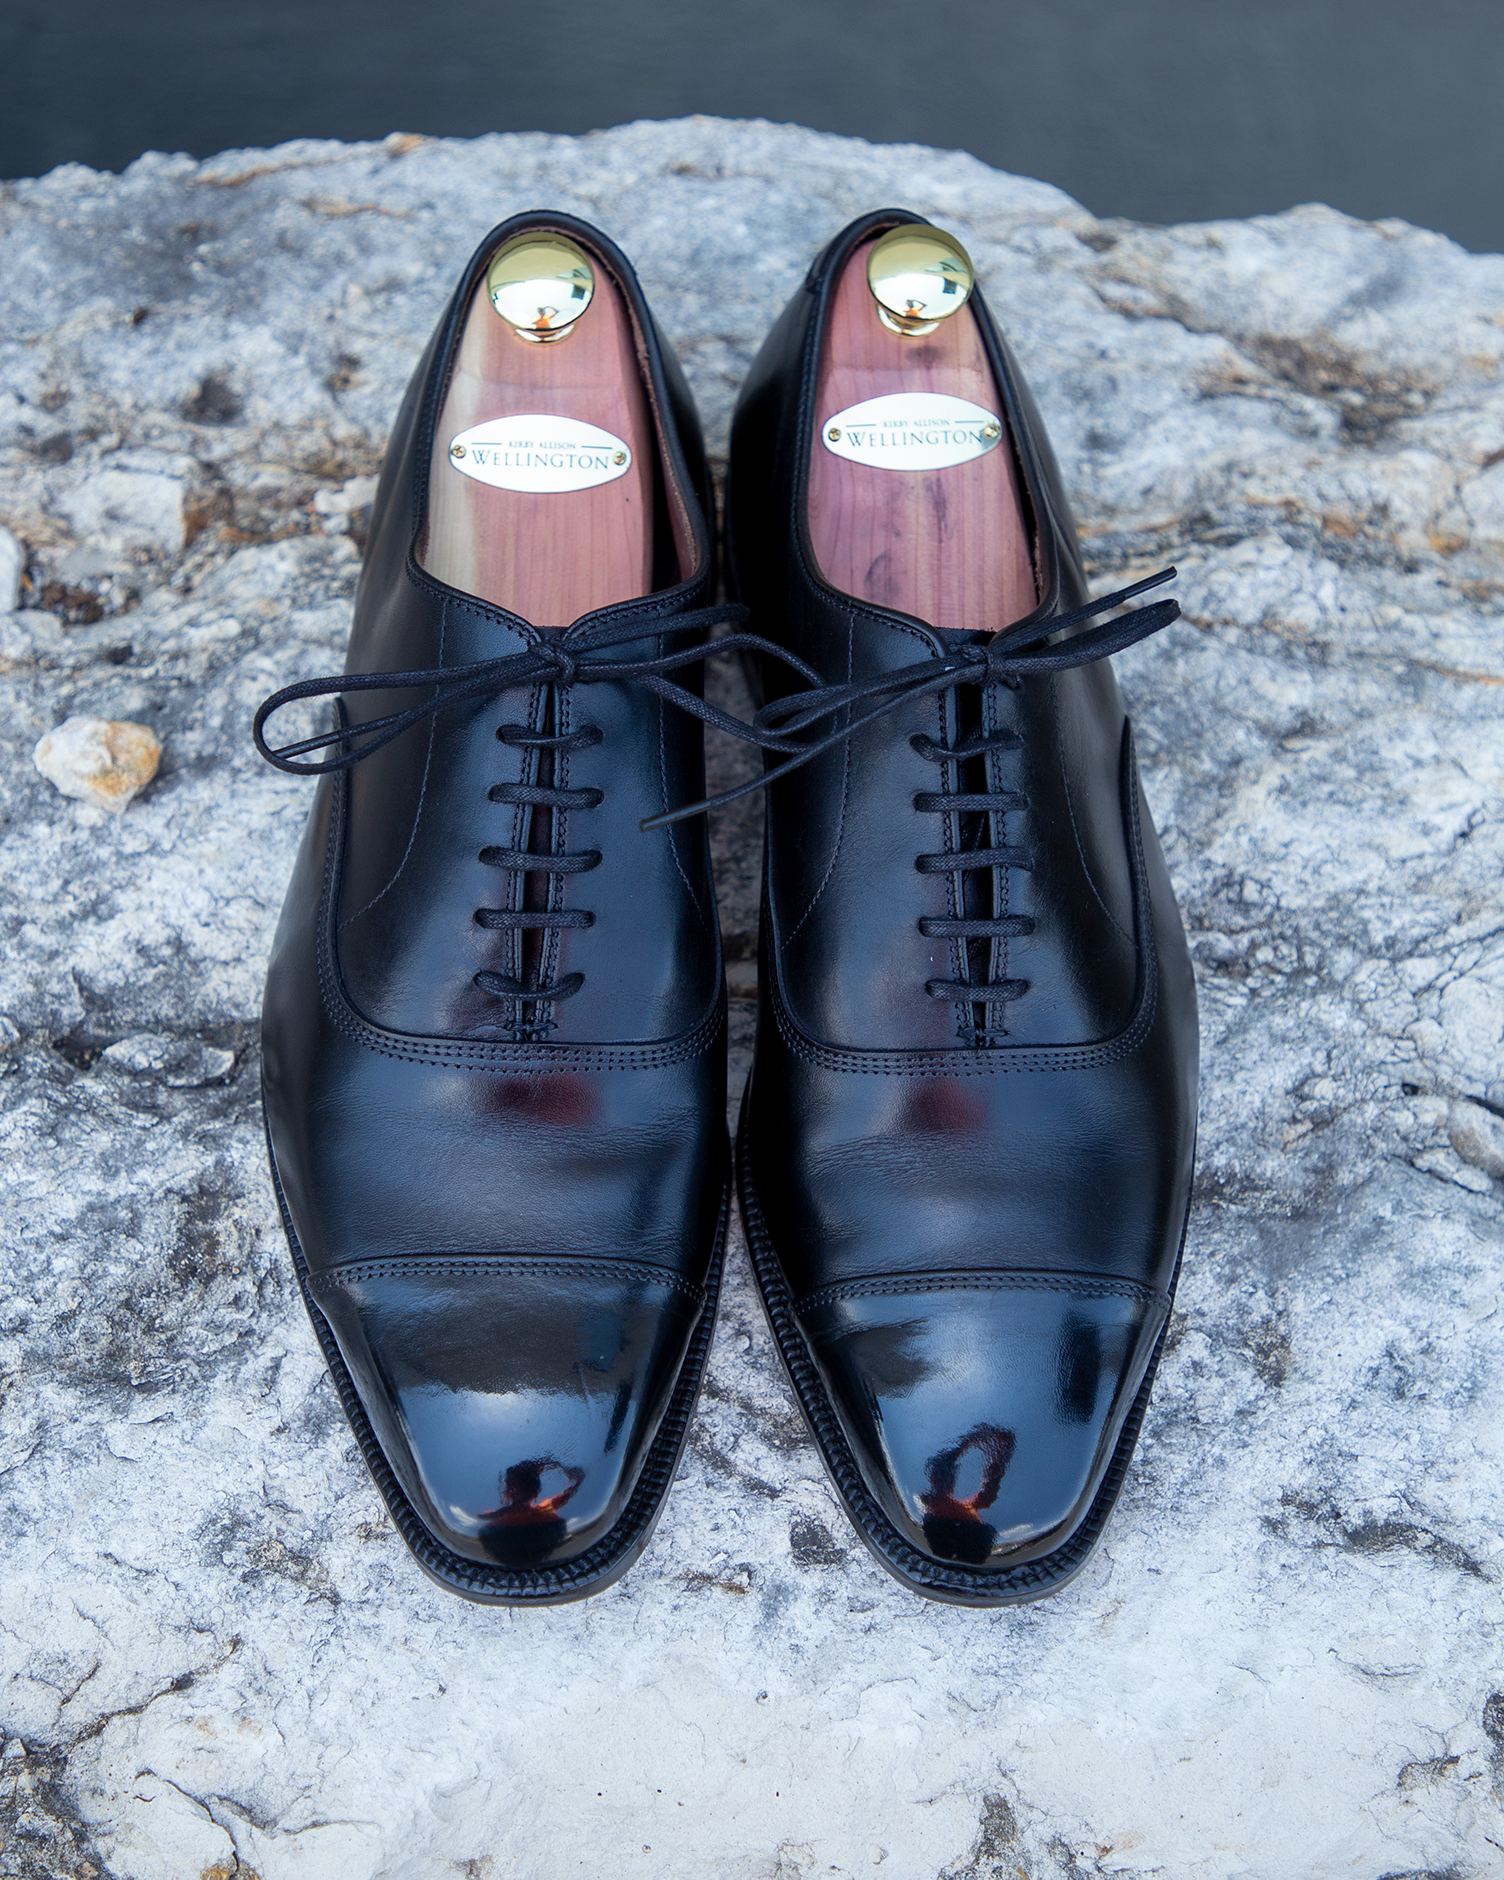 A pair of black oxford shoes with the KirbyAllison.com High Shine Service sitting on a rock.